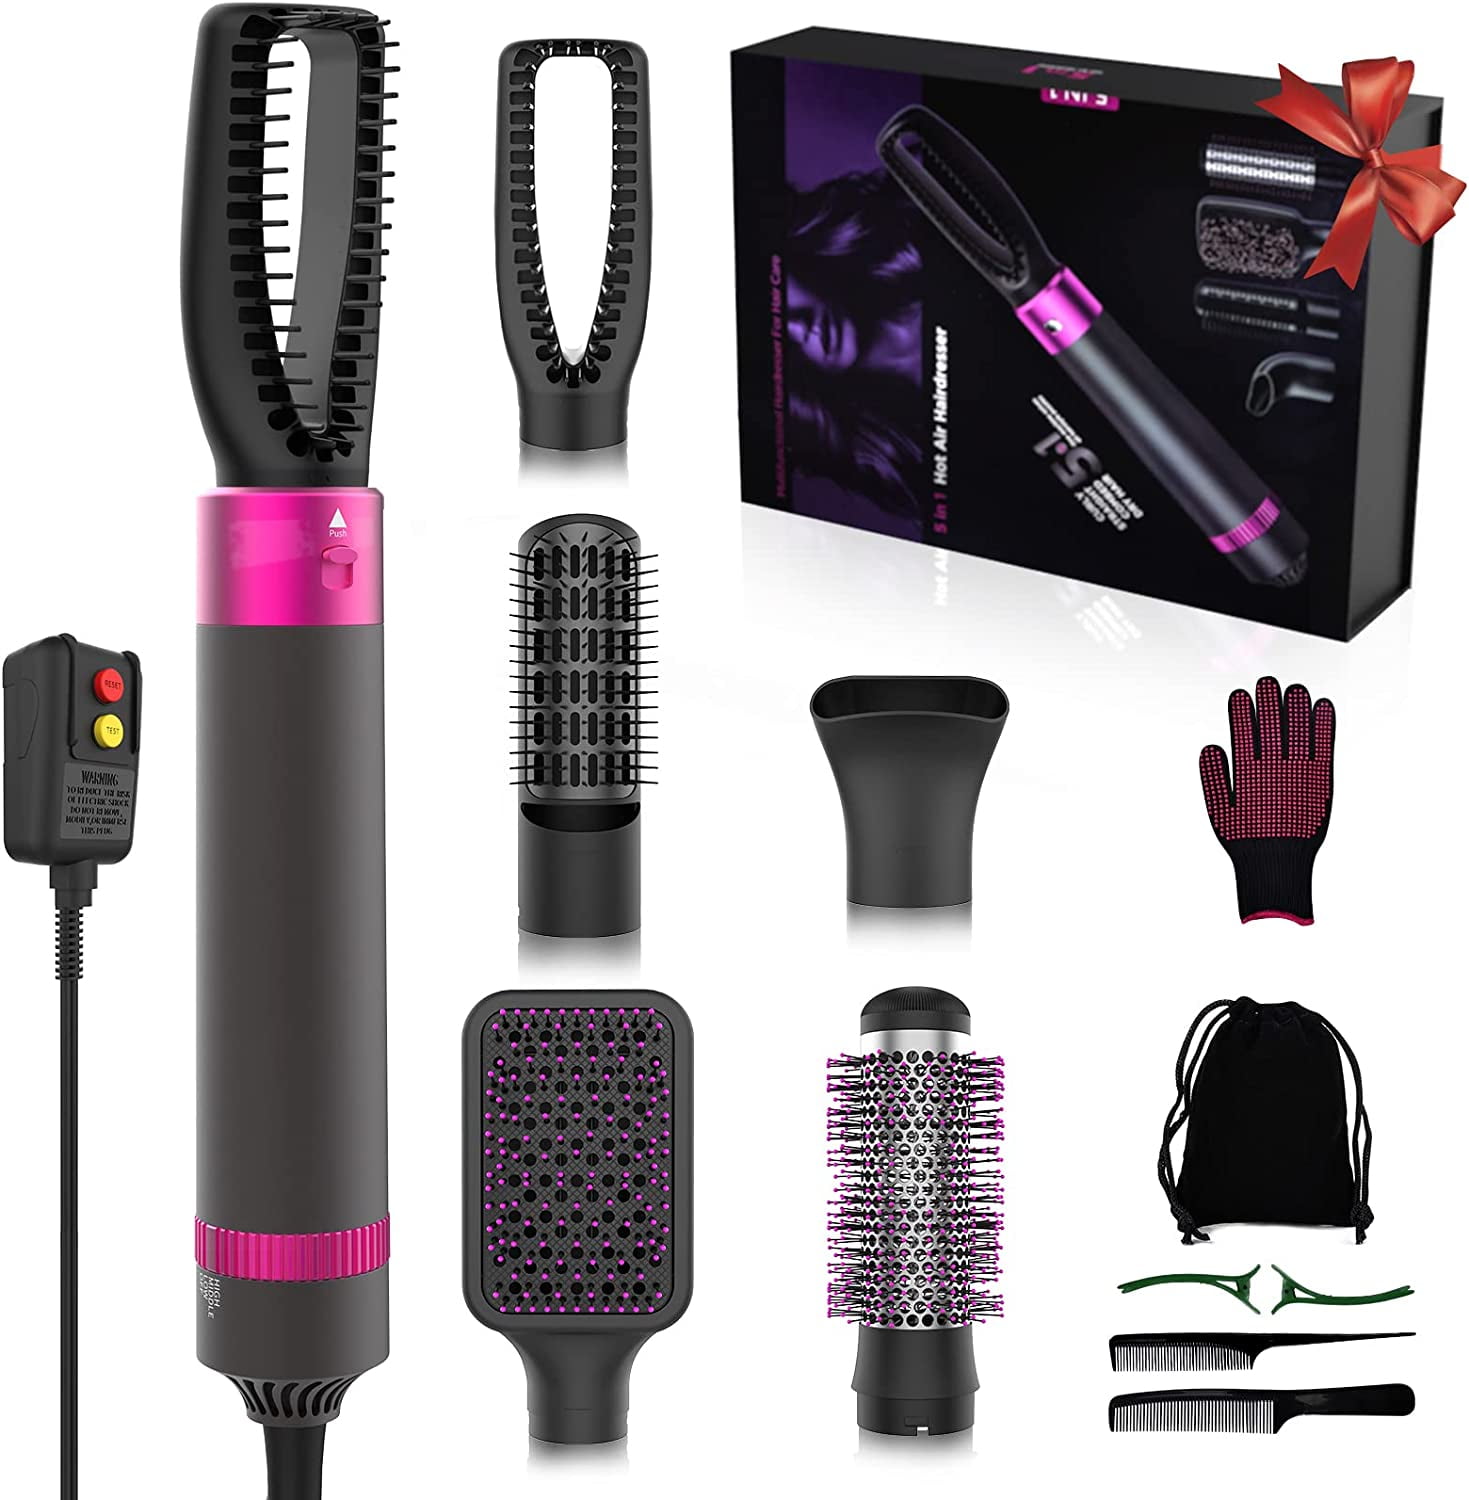 Upgrated 5 In 1 Hot Air Hair Curler Set Negative ion Hair Dryer Hot Comb  Brush Curling Iron Styler Tools For Dyson Airwraps - AliExpress